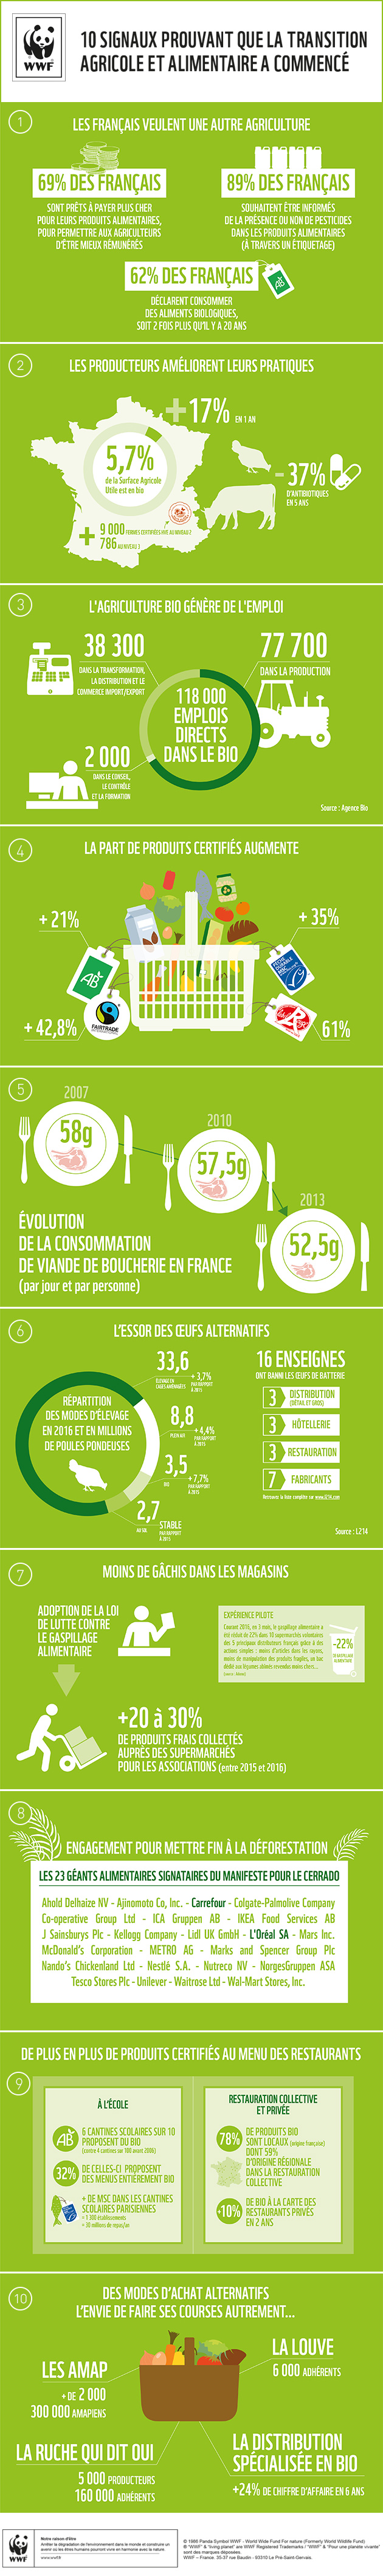 wwf transition agricole alimentaire